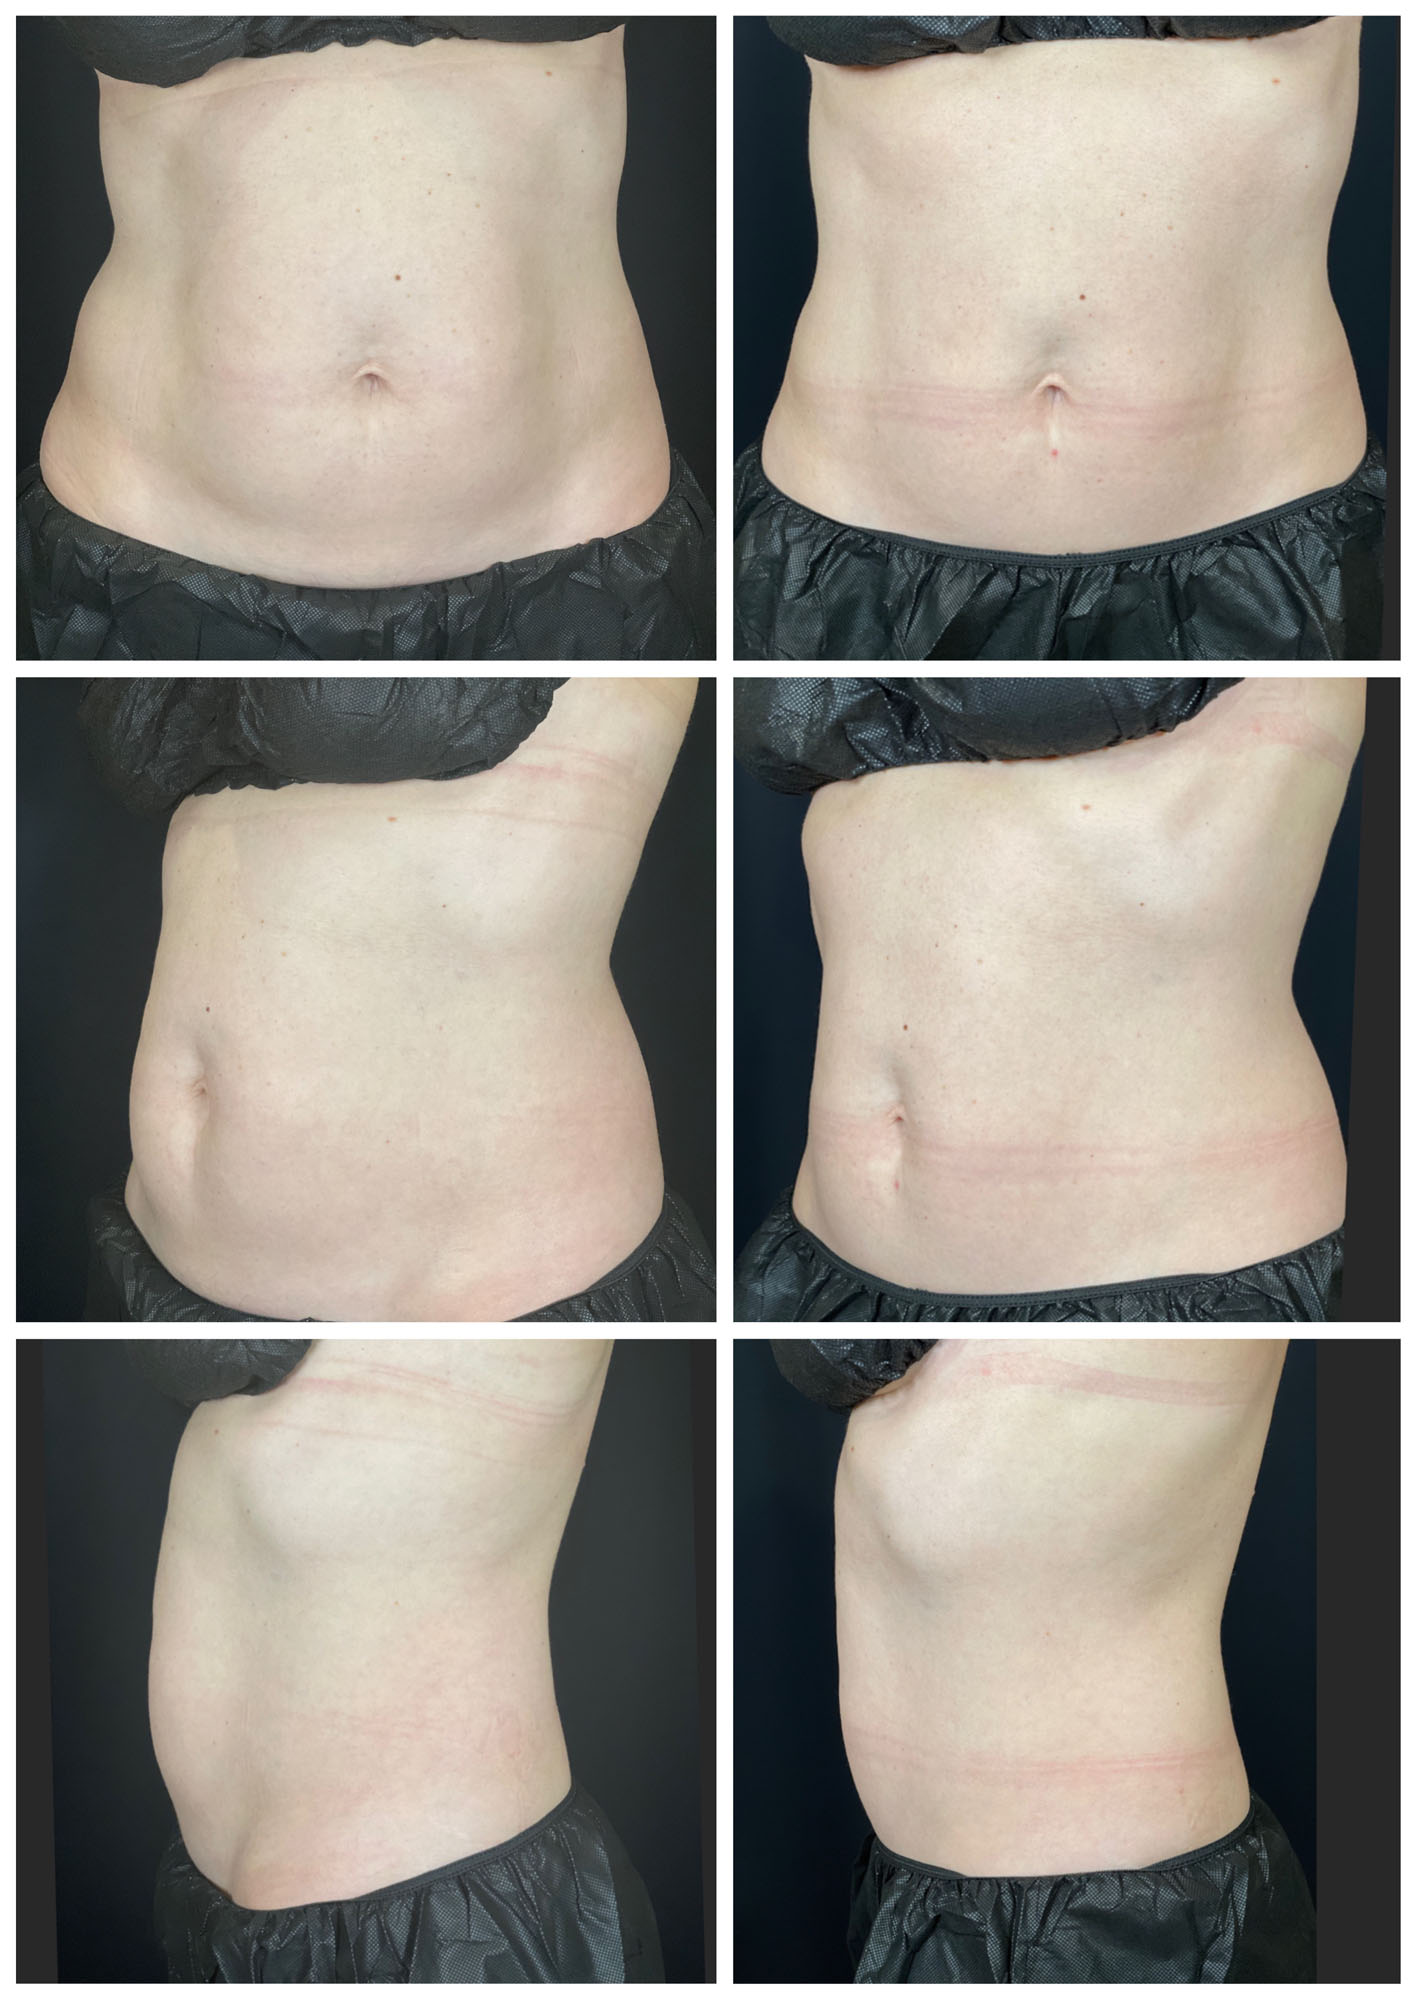 Abdomen CoolSculpting Before and After images from Refresh Aesthetic Center